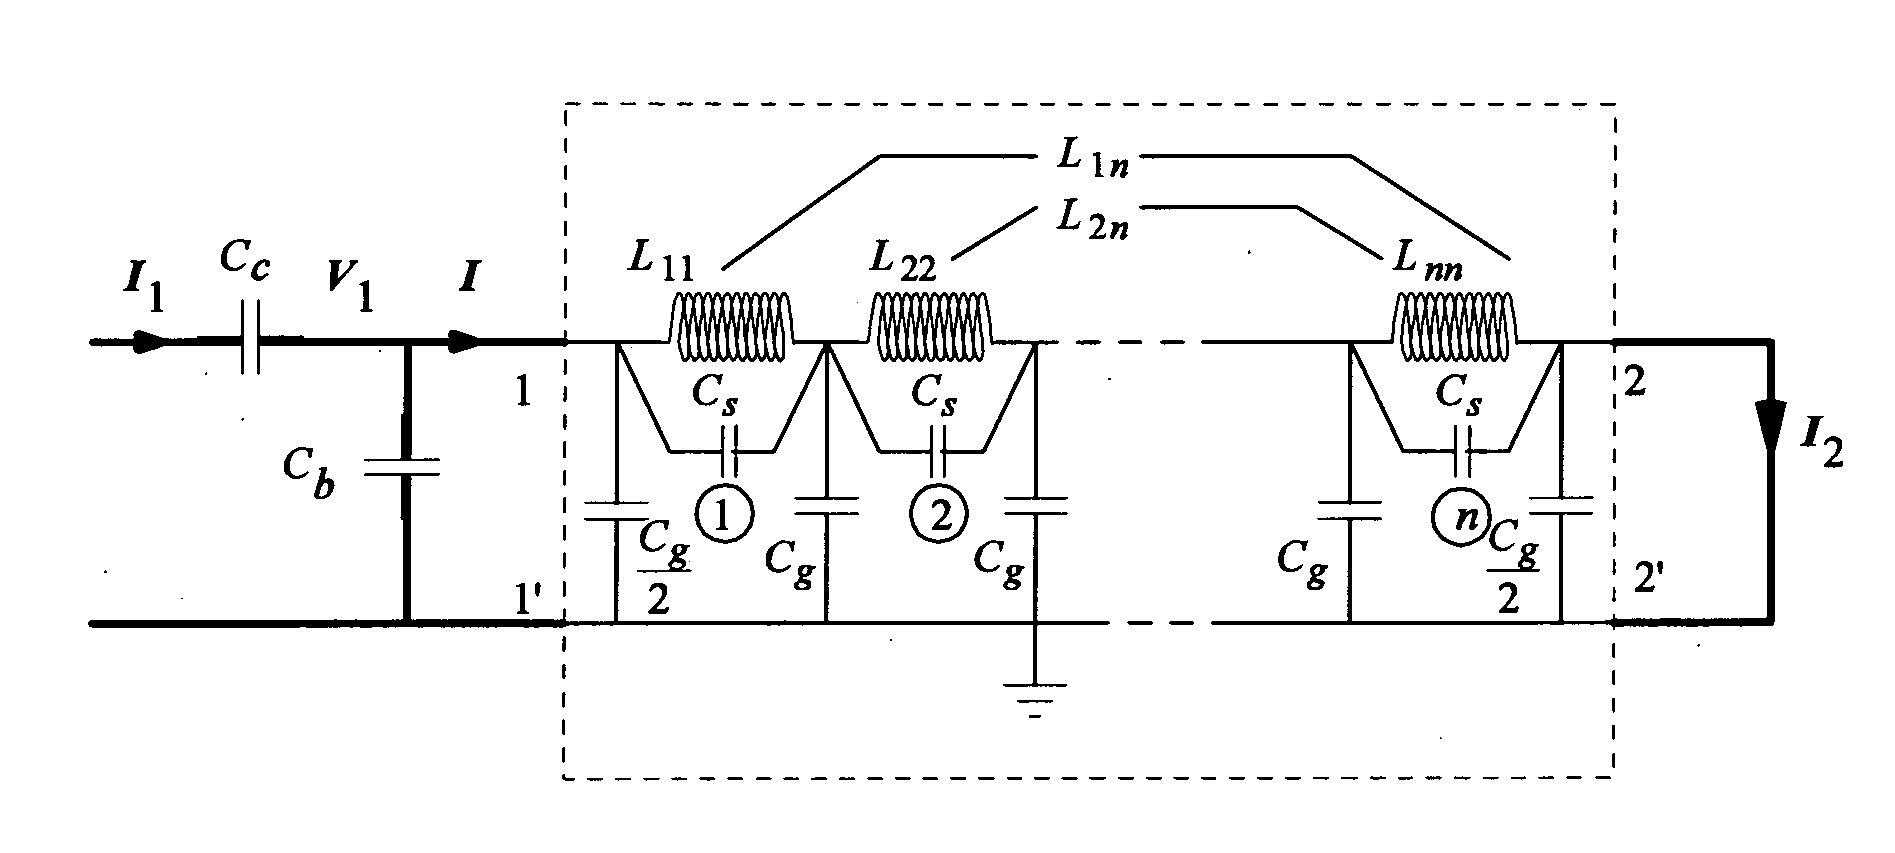 On-line diagnostic method for health monitoring of a transformer